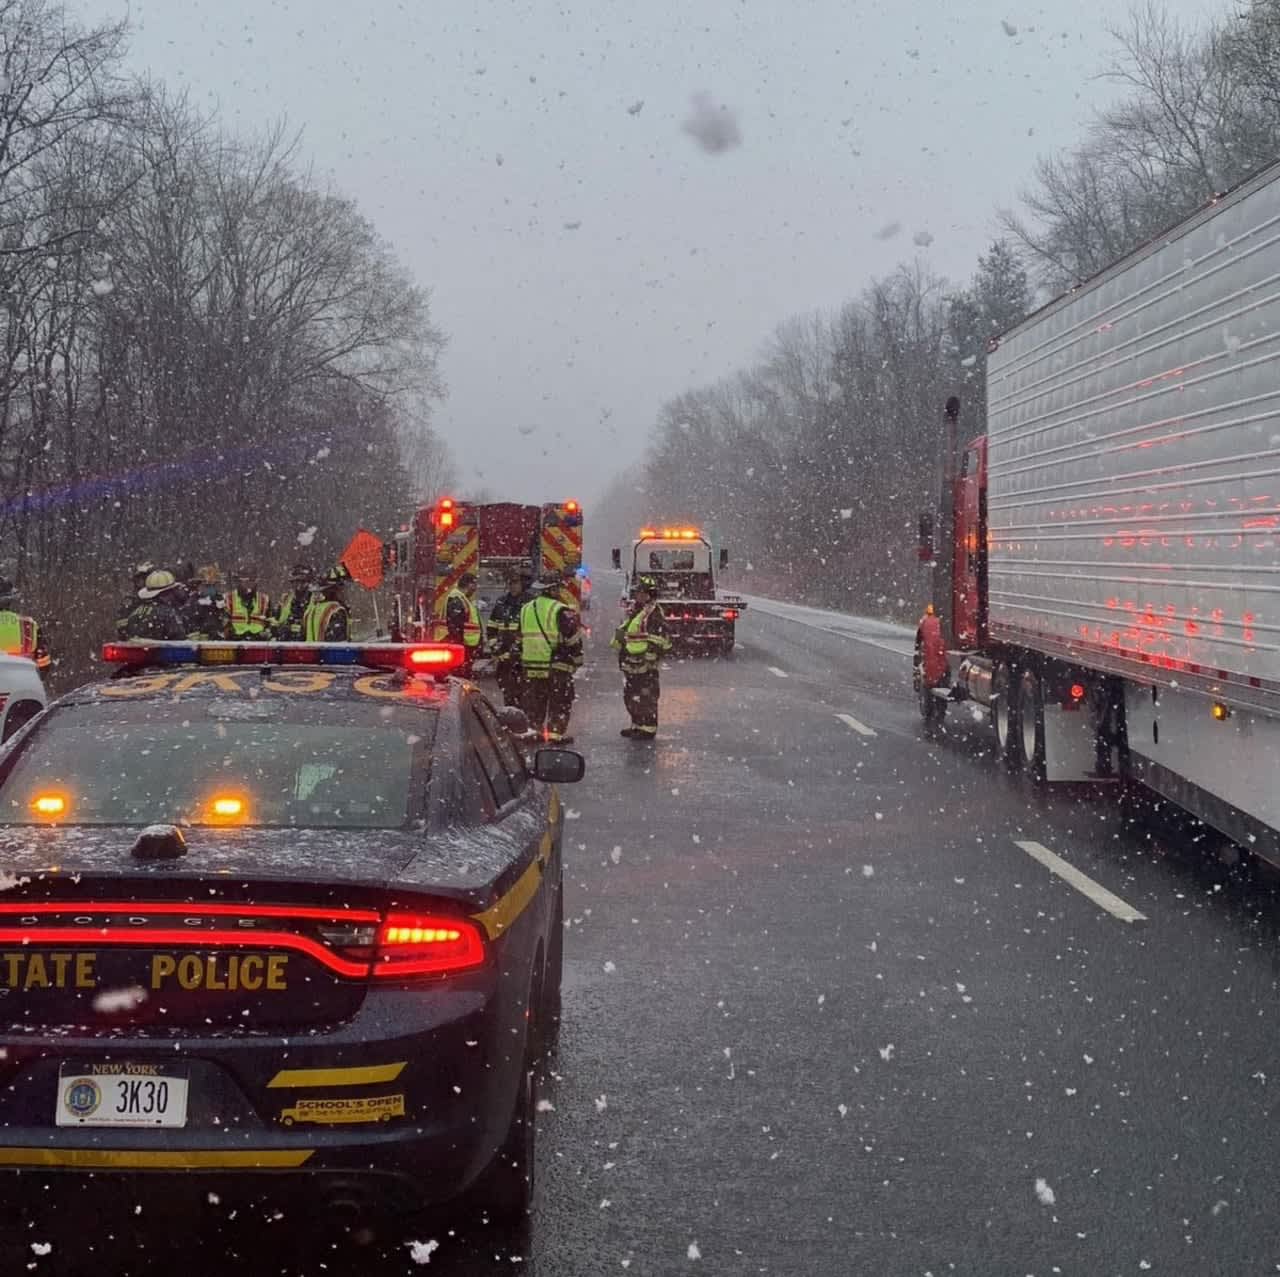 Southbound I-684 in Bedford was closed due to a serious crash. The lanes have since reopened.